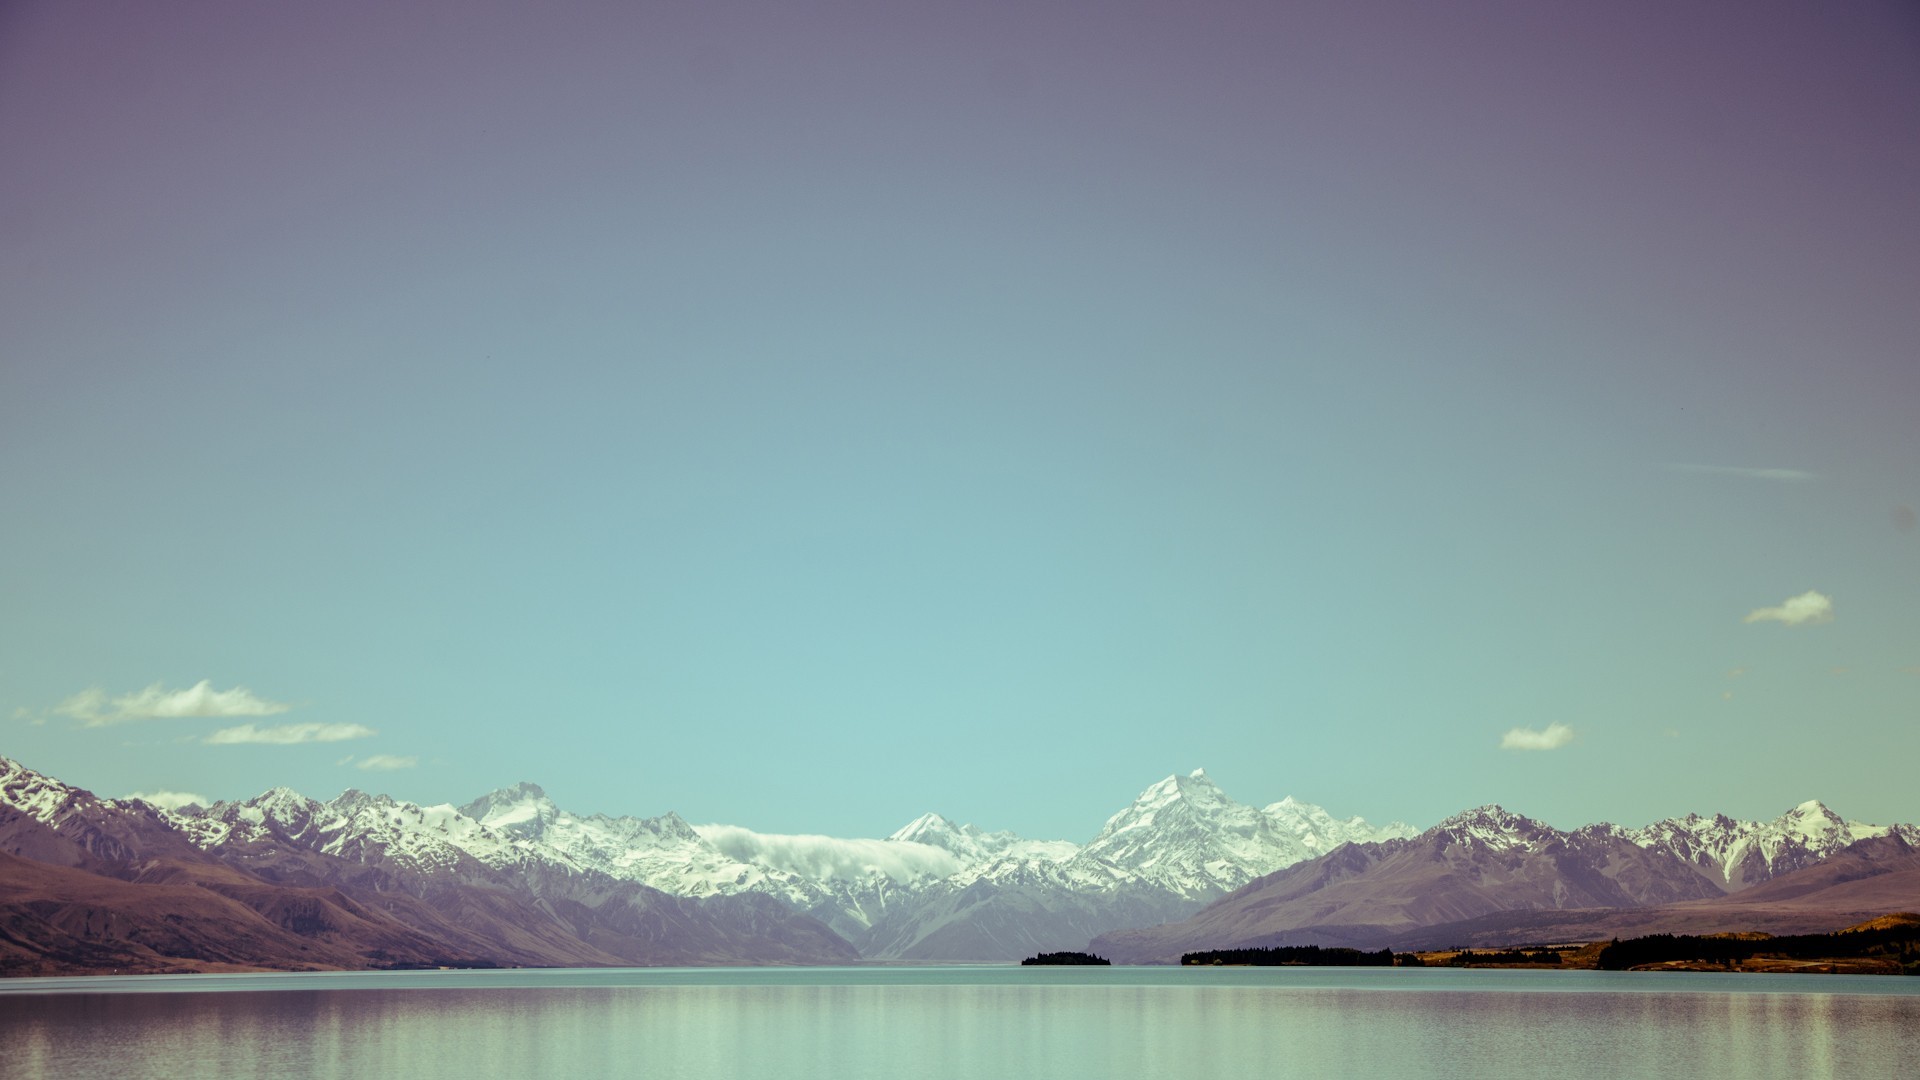 General 1920x1080 mountains lake snow water clear sky nature sky